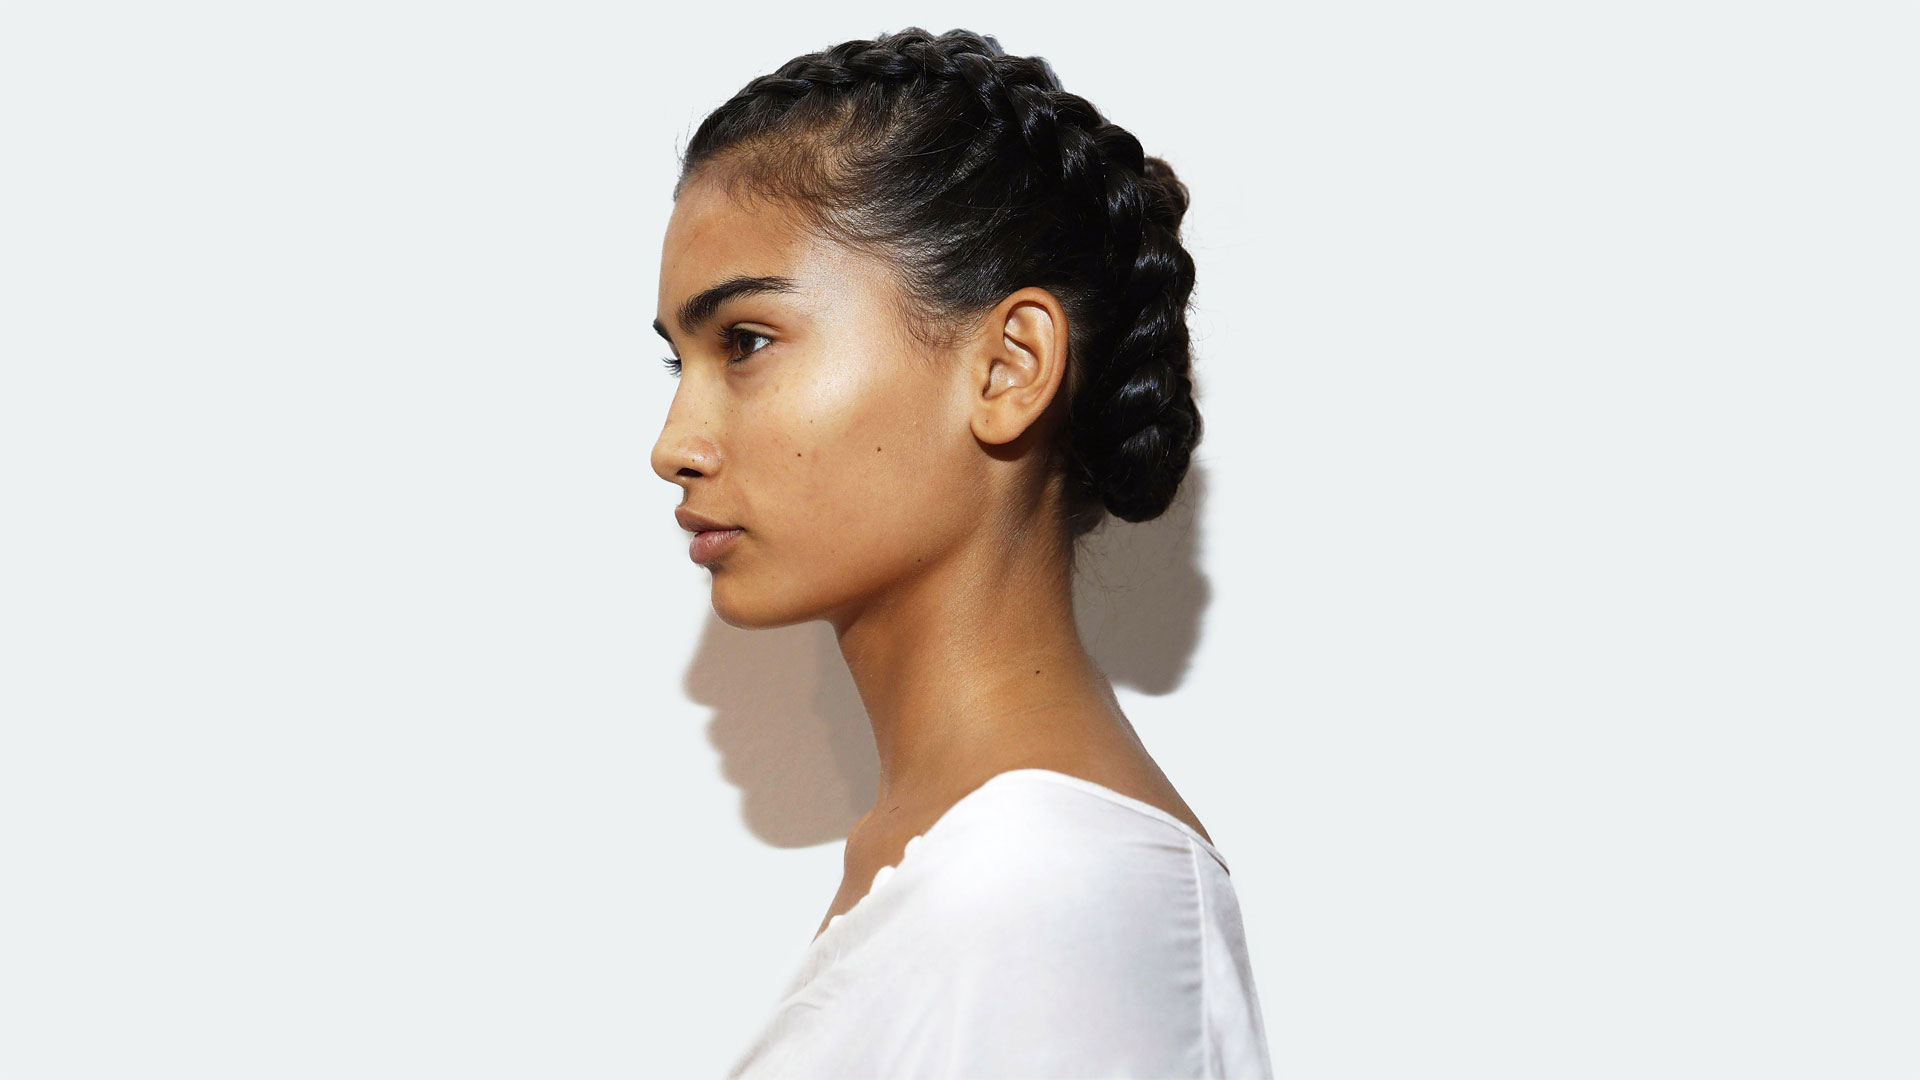 Aggregate 170+ braided to the side hairstyles latest